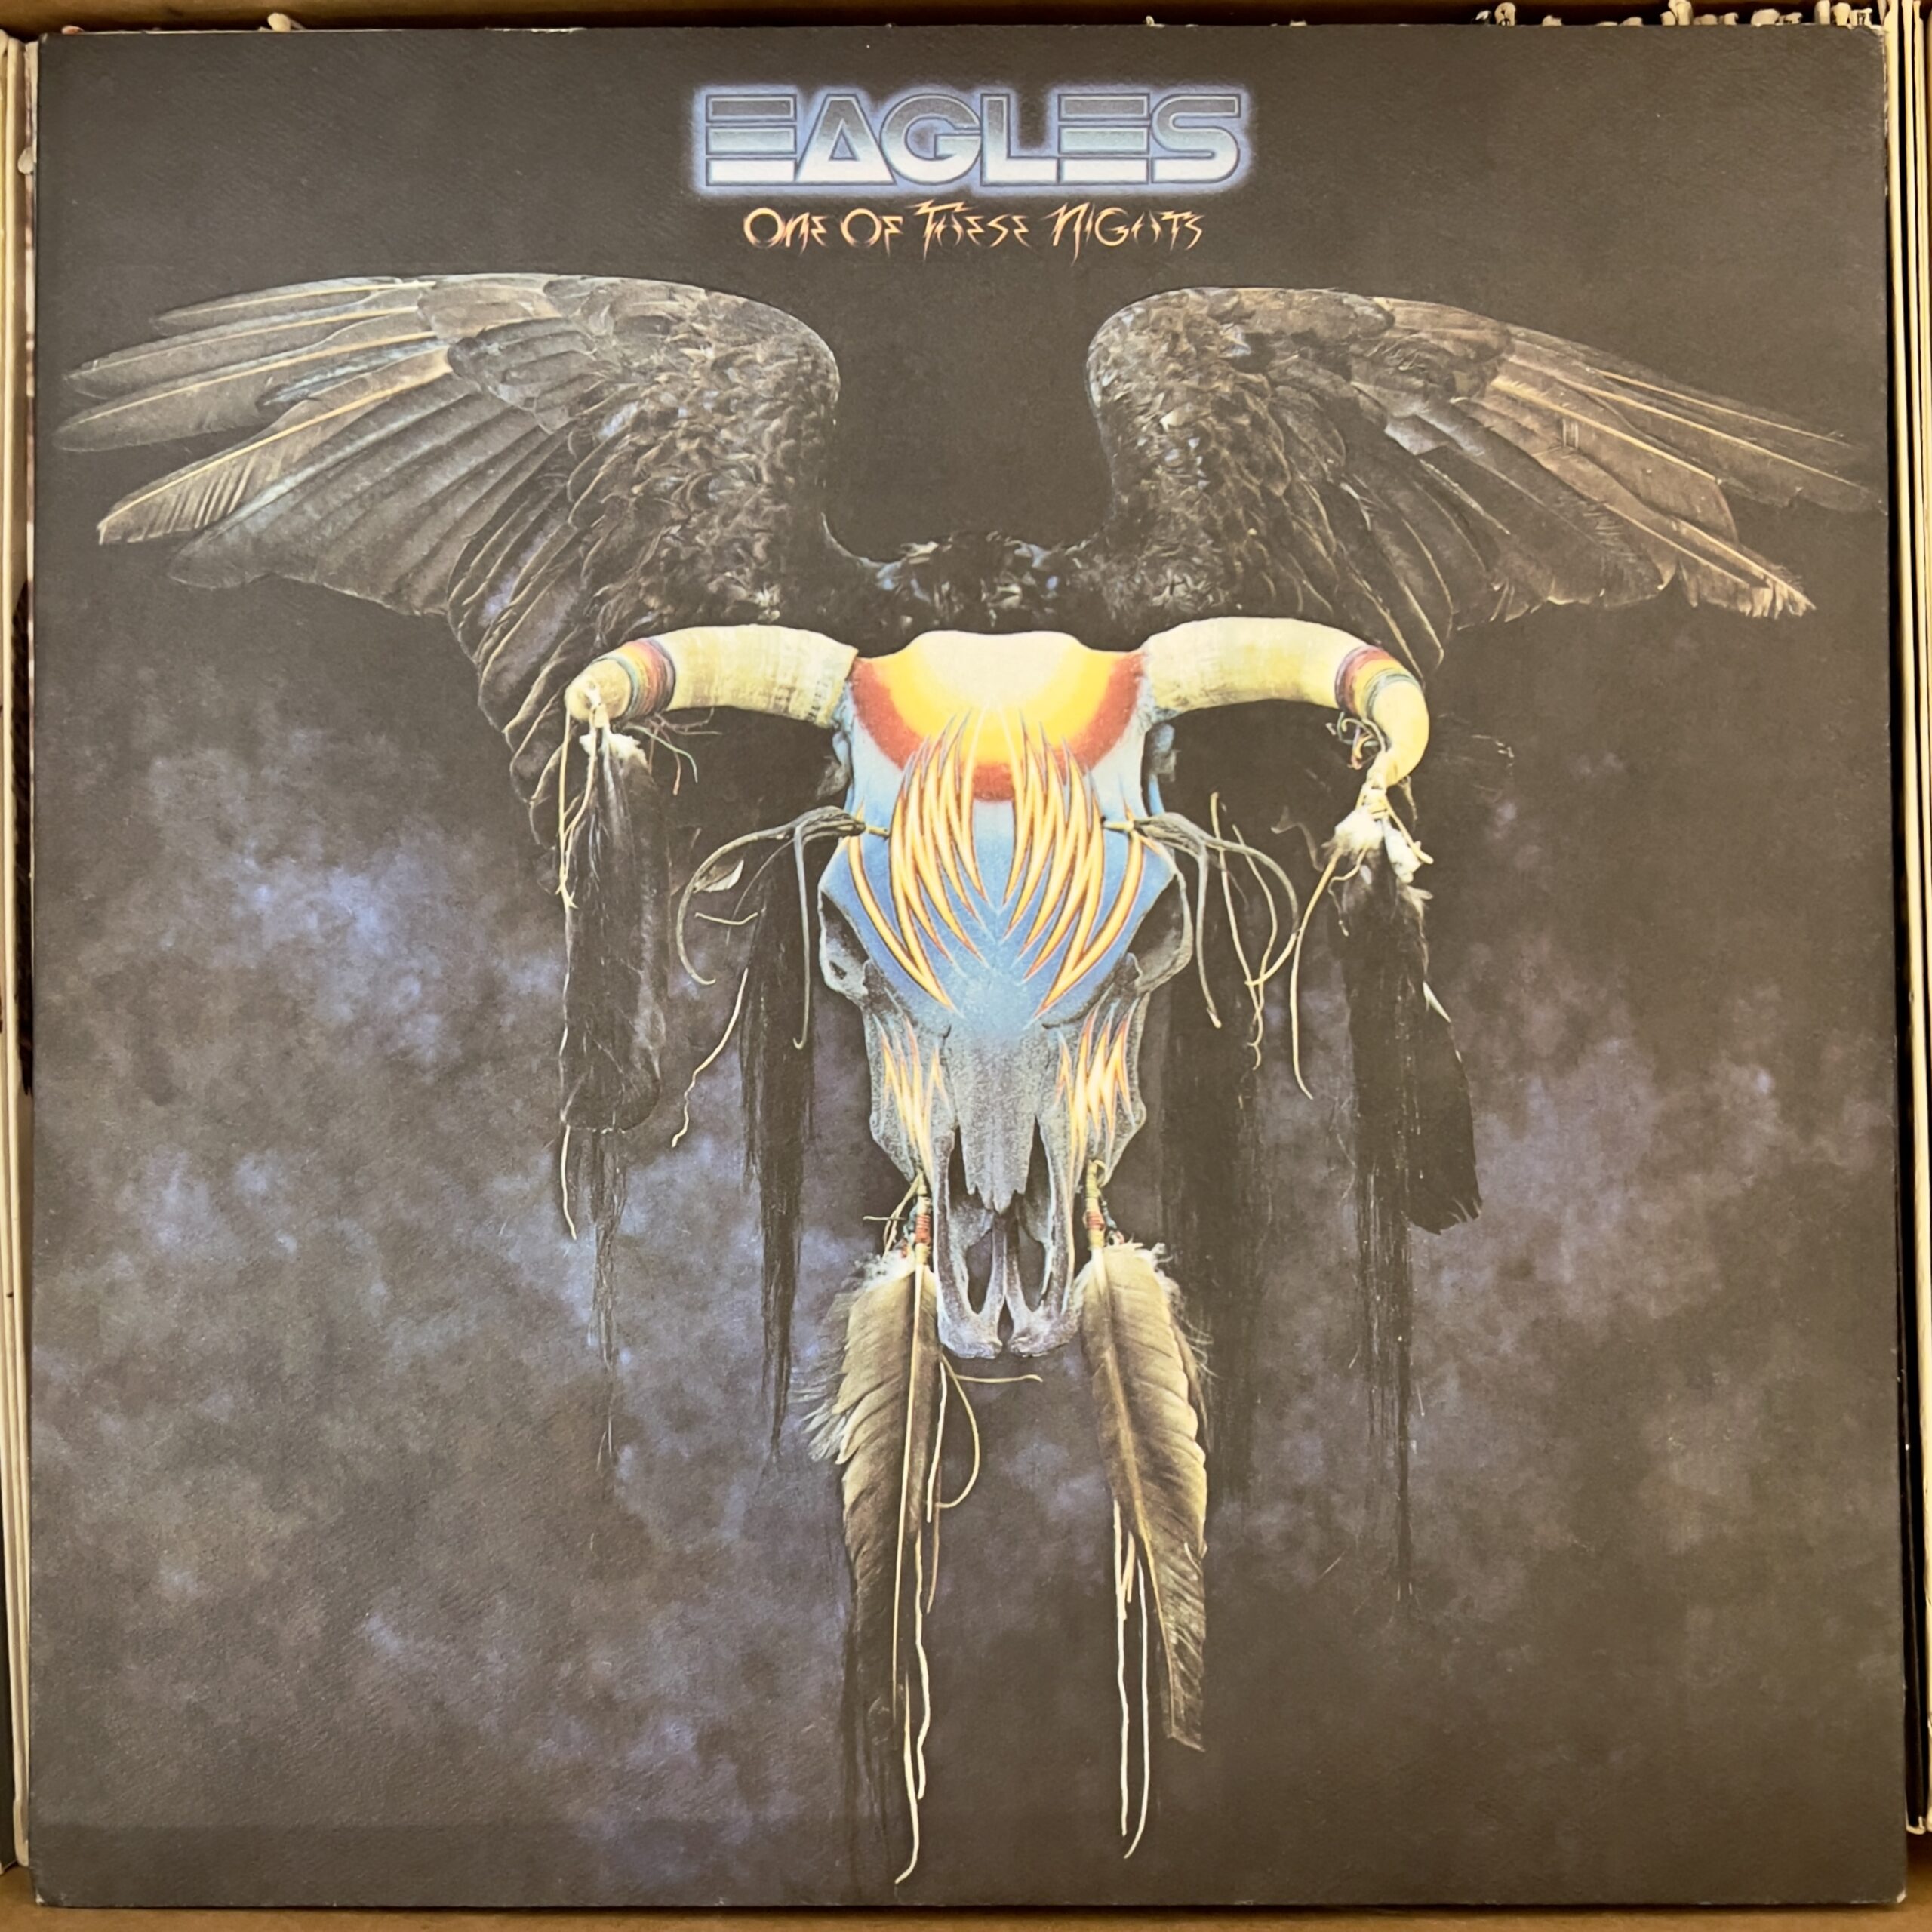 One of These Nights by the Eagles